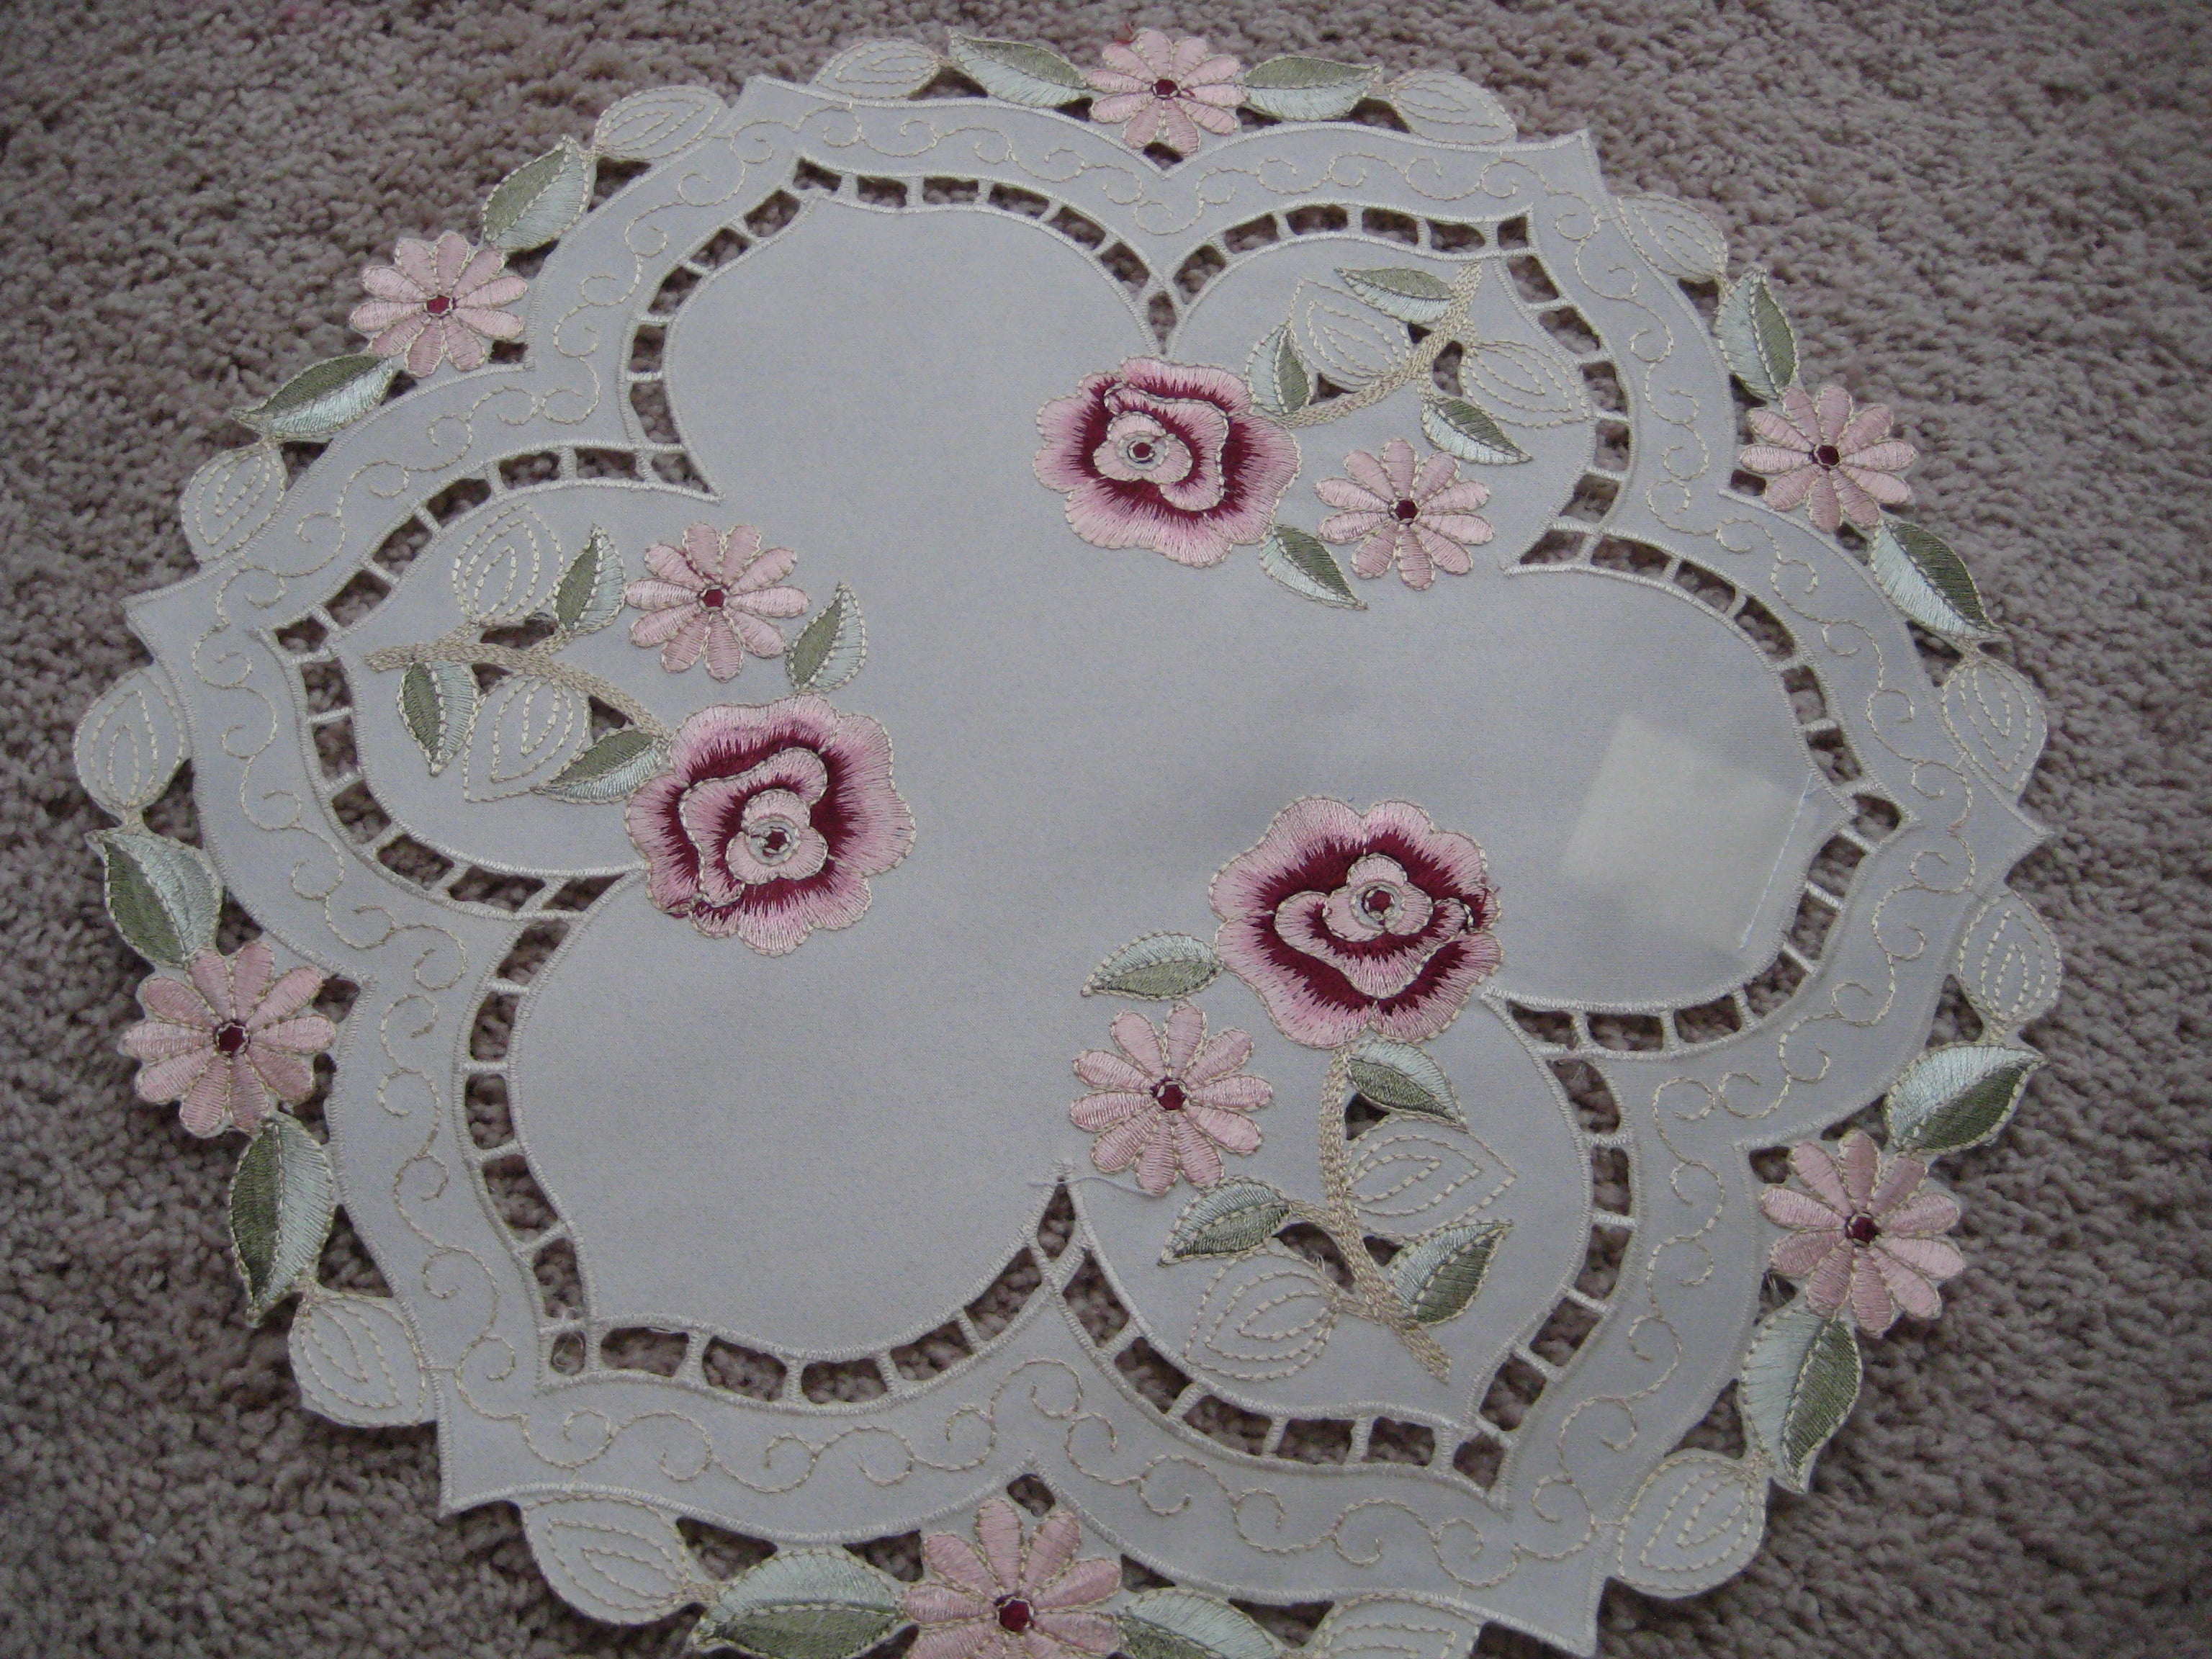 7" VINTAGE ROSES CUT EMBROIDERY WHITE PINK FINE COTTON ROUND COASTER DOILY SIZE 